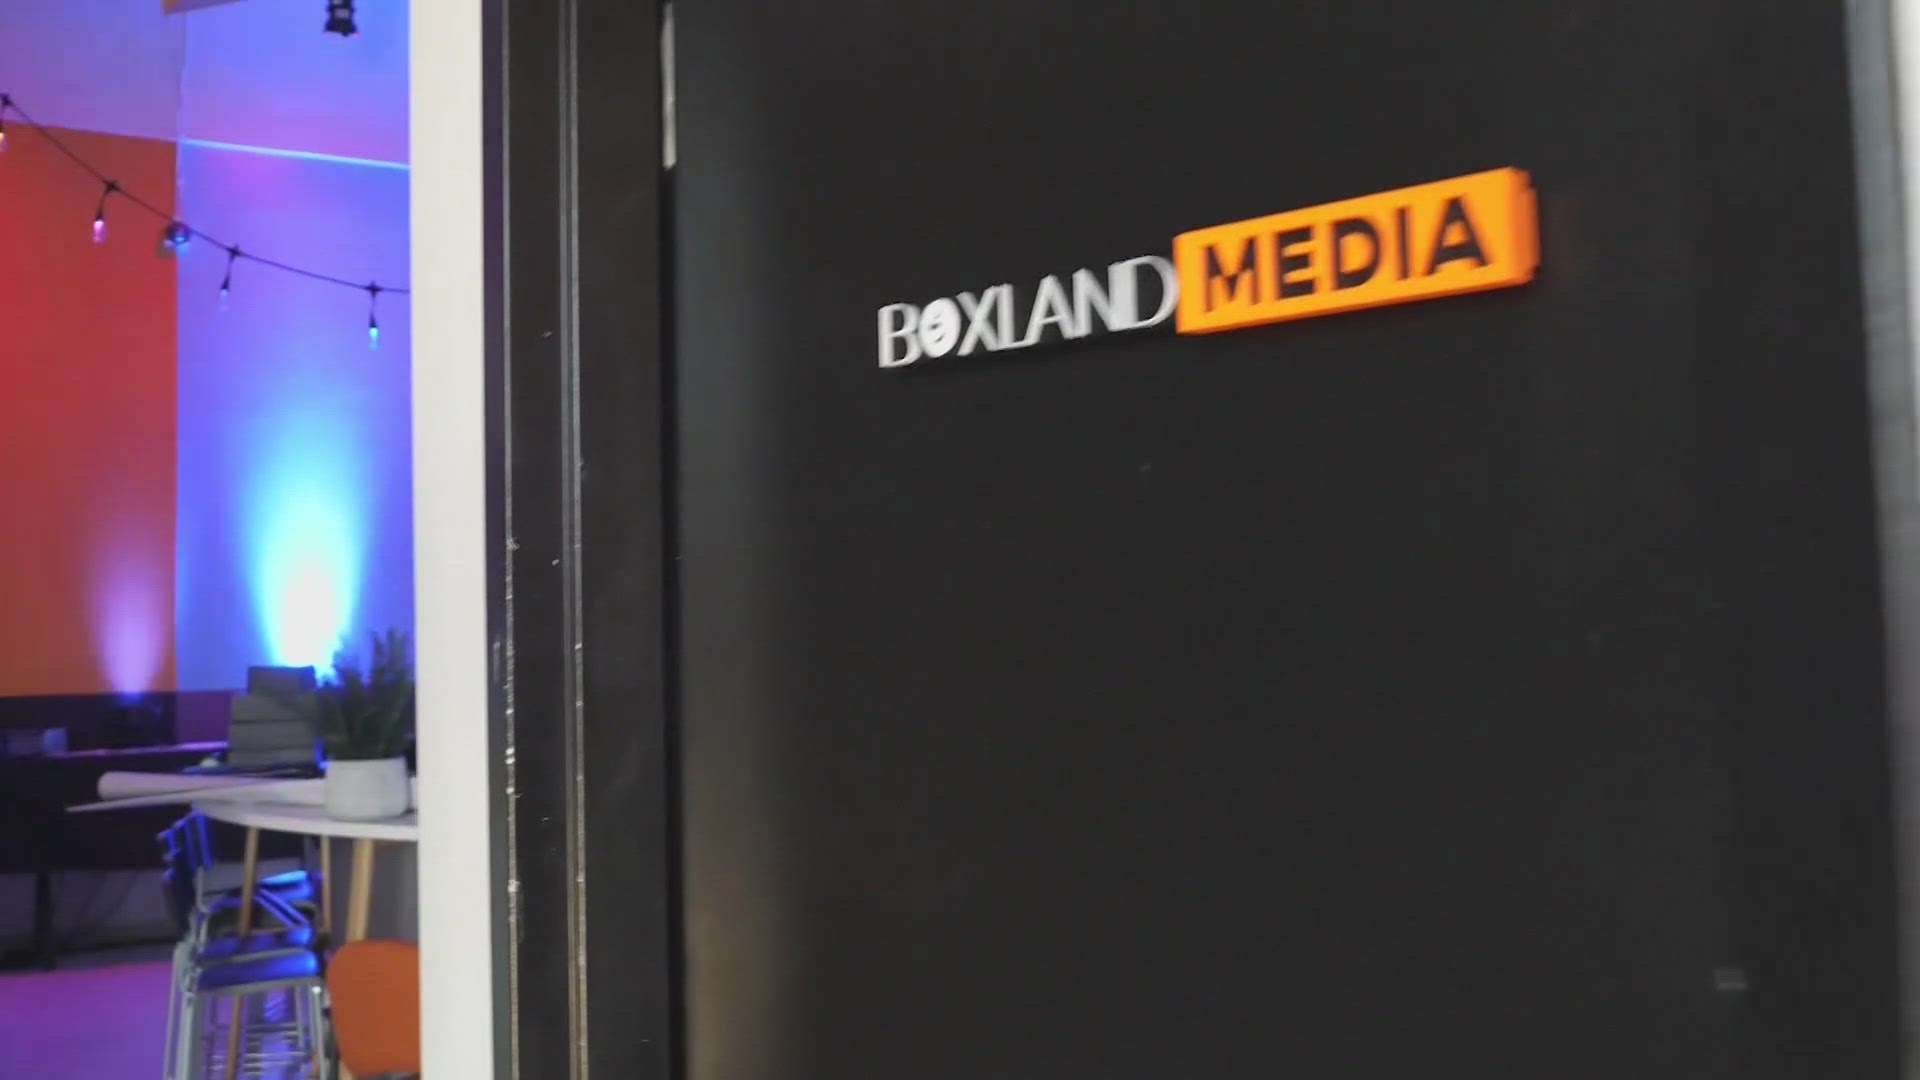 Boxland is a 501 c3 nonprofit with a mission to support multimedia art and artists.